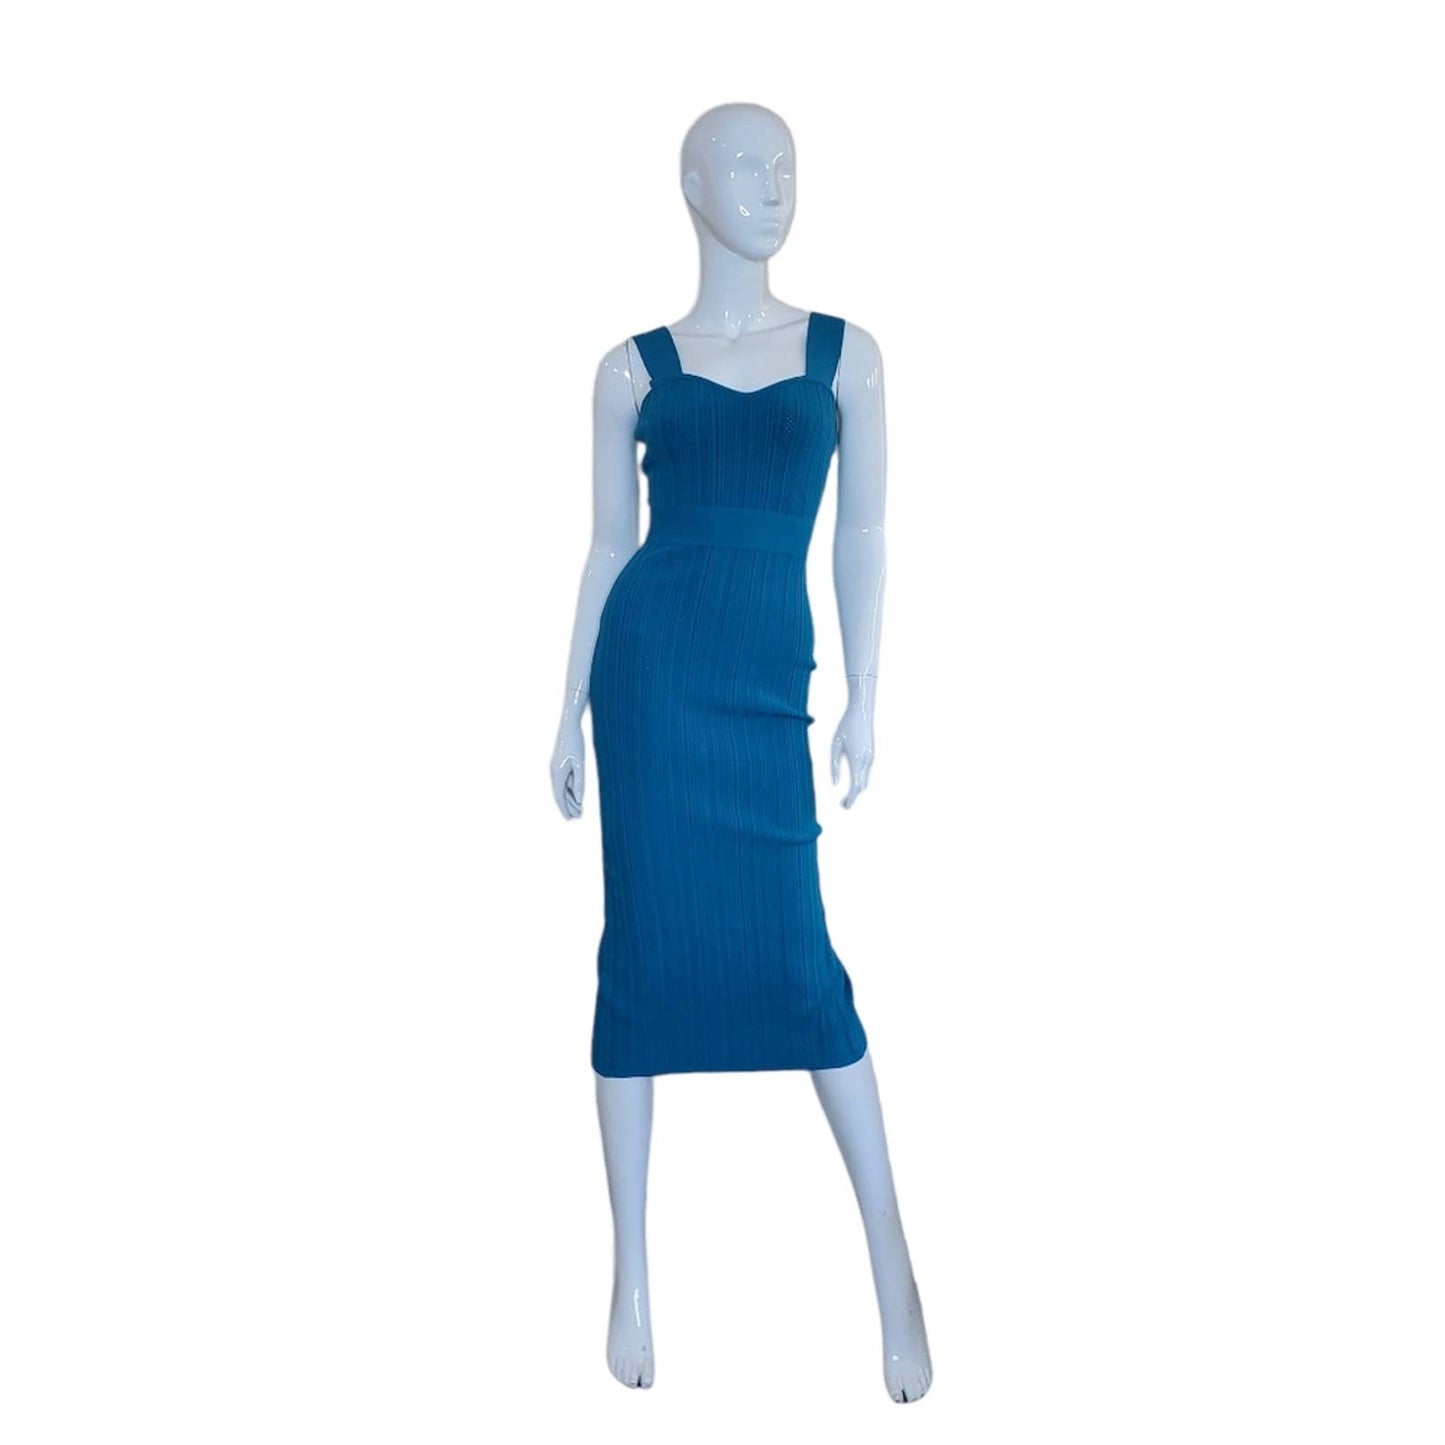 HERVE LEGER Teal Pointelle-Knit Midi Dress, Size Small